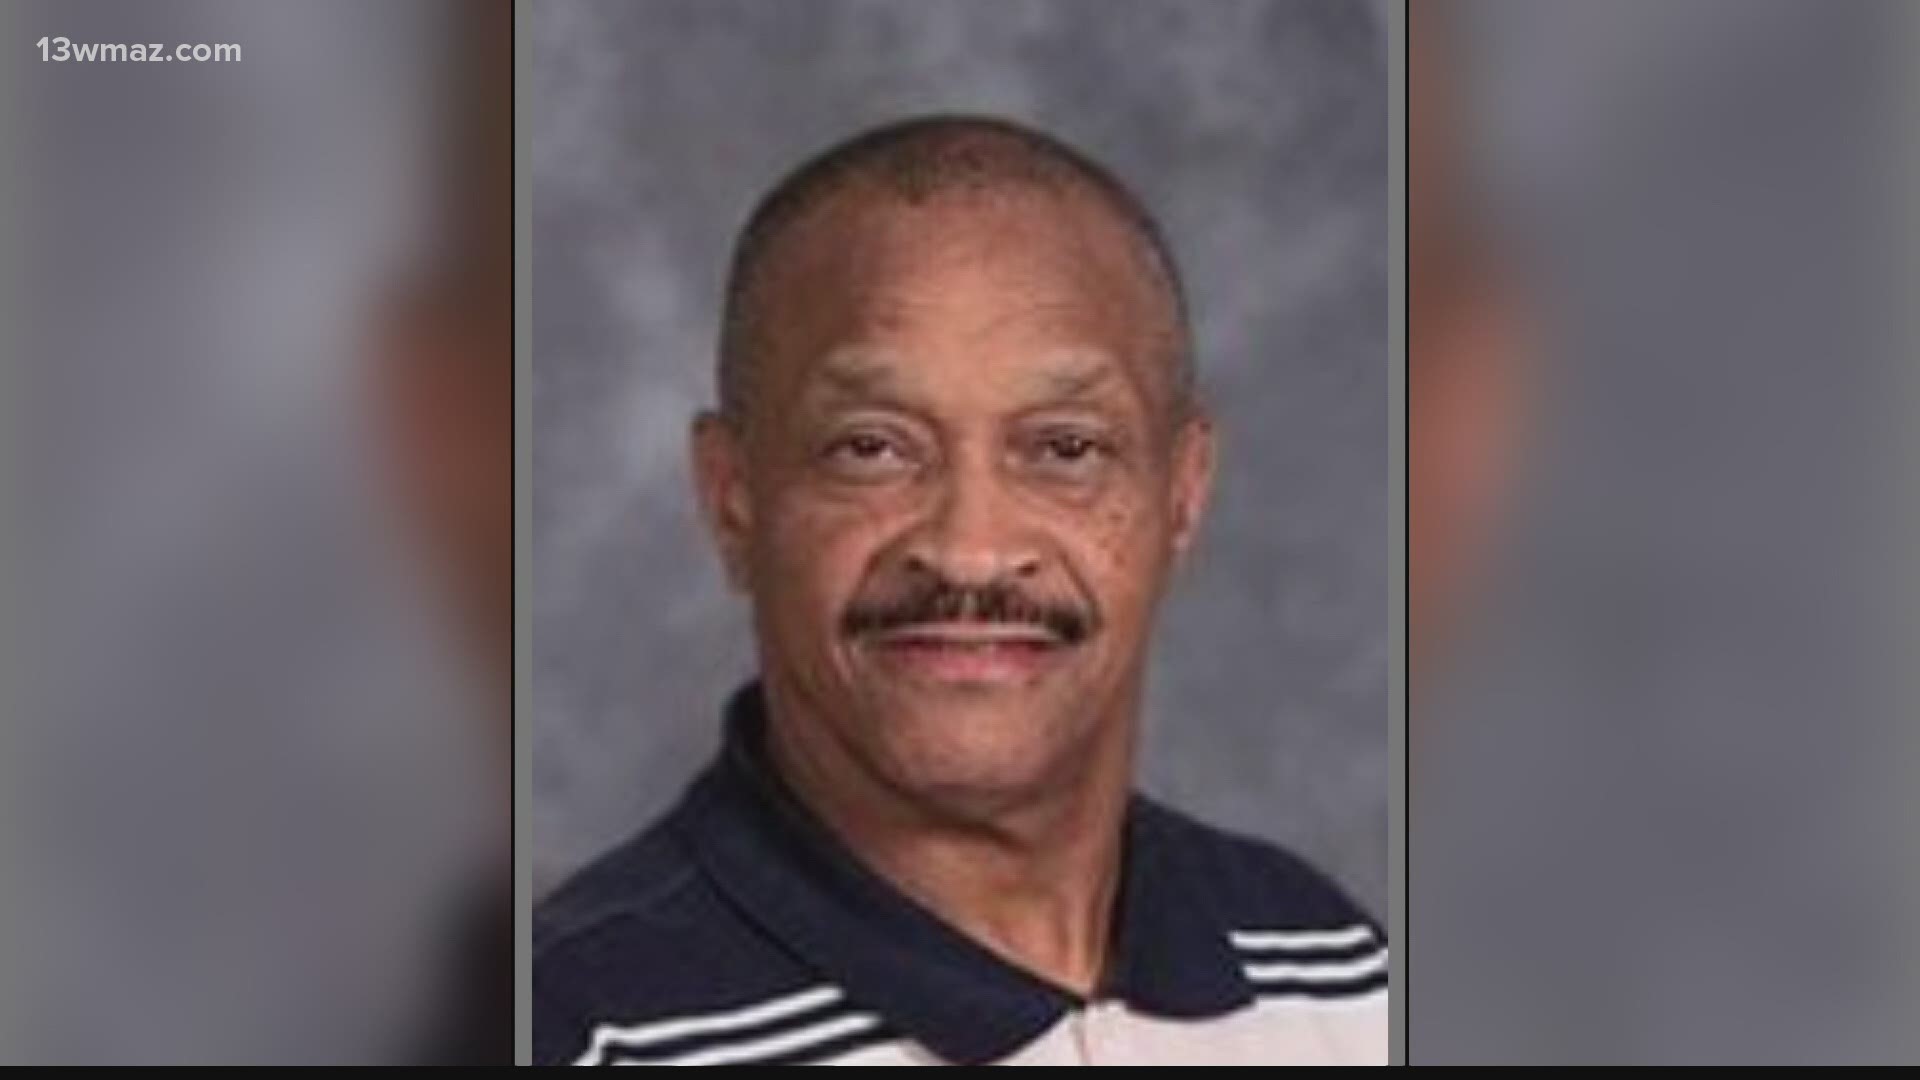 The beloved teacher and coach David Lee Carey spent the last 25 years at Mary Persons, where he touched the lives of both students and staff.